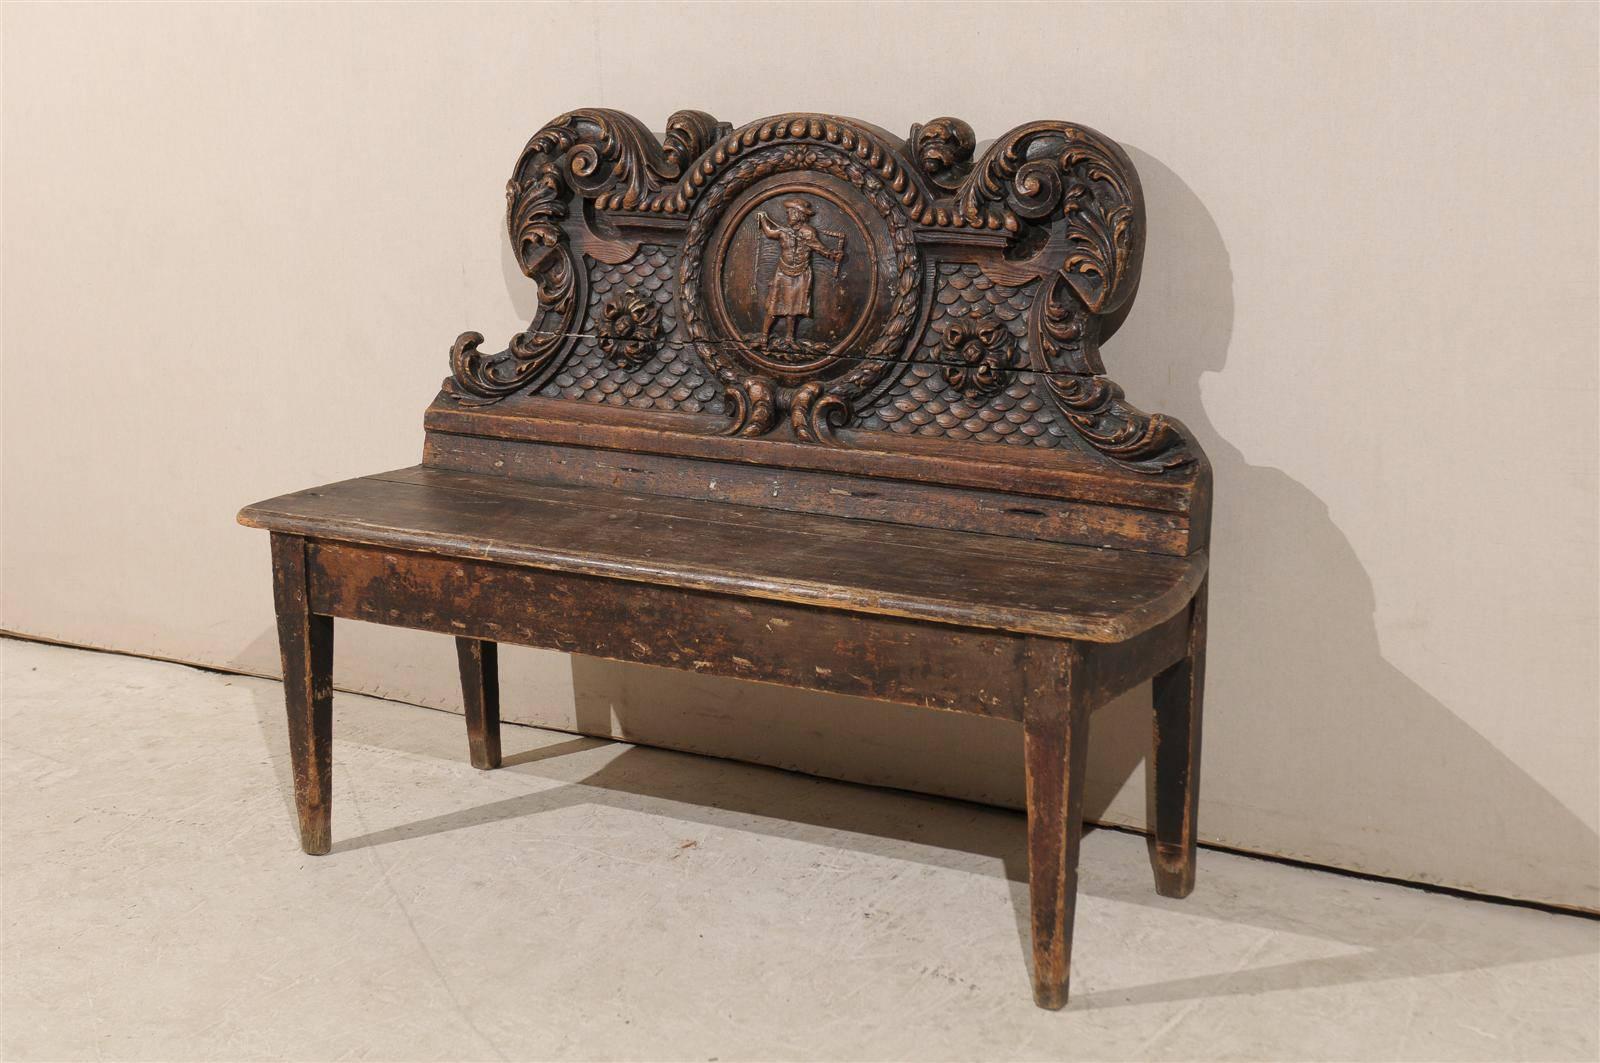 An Italian 18th Century Richly-Carved Wood Bench with Ornate Backrest   1